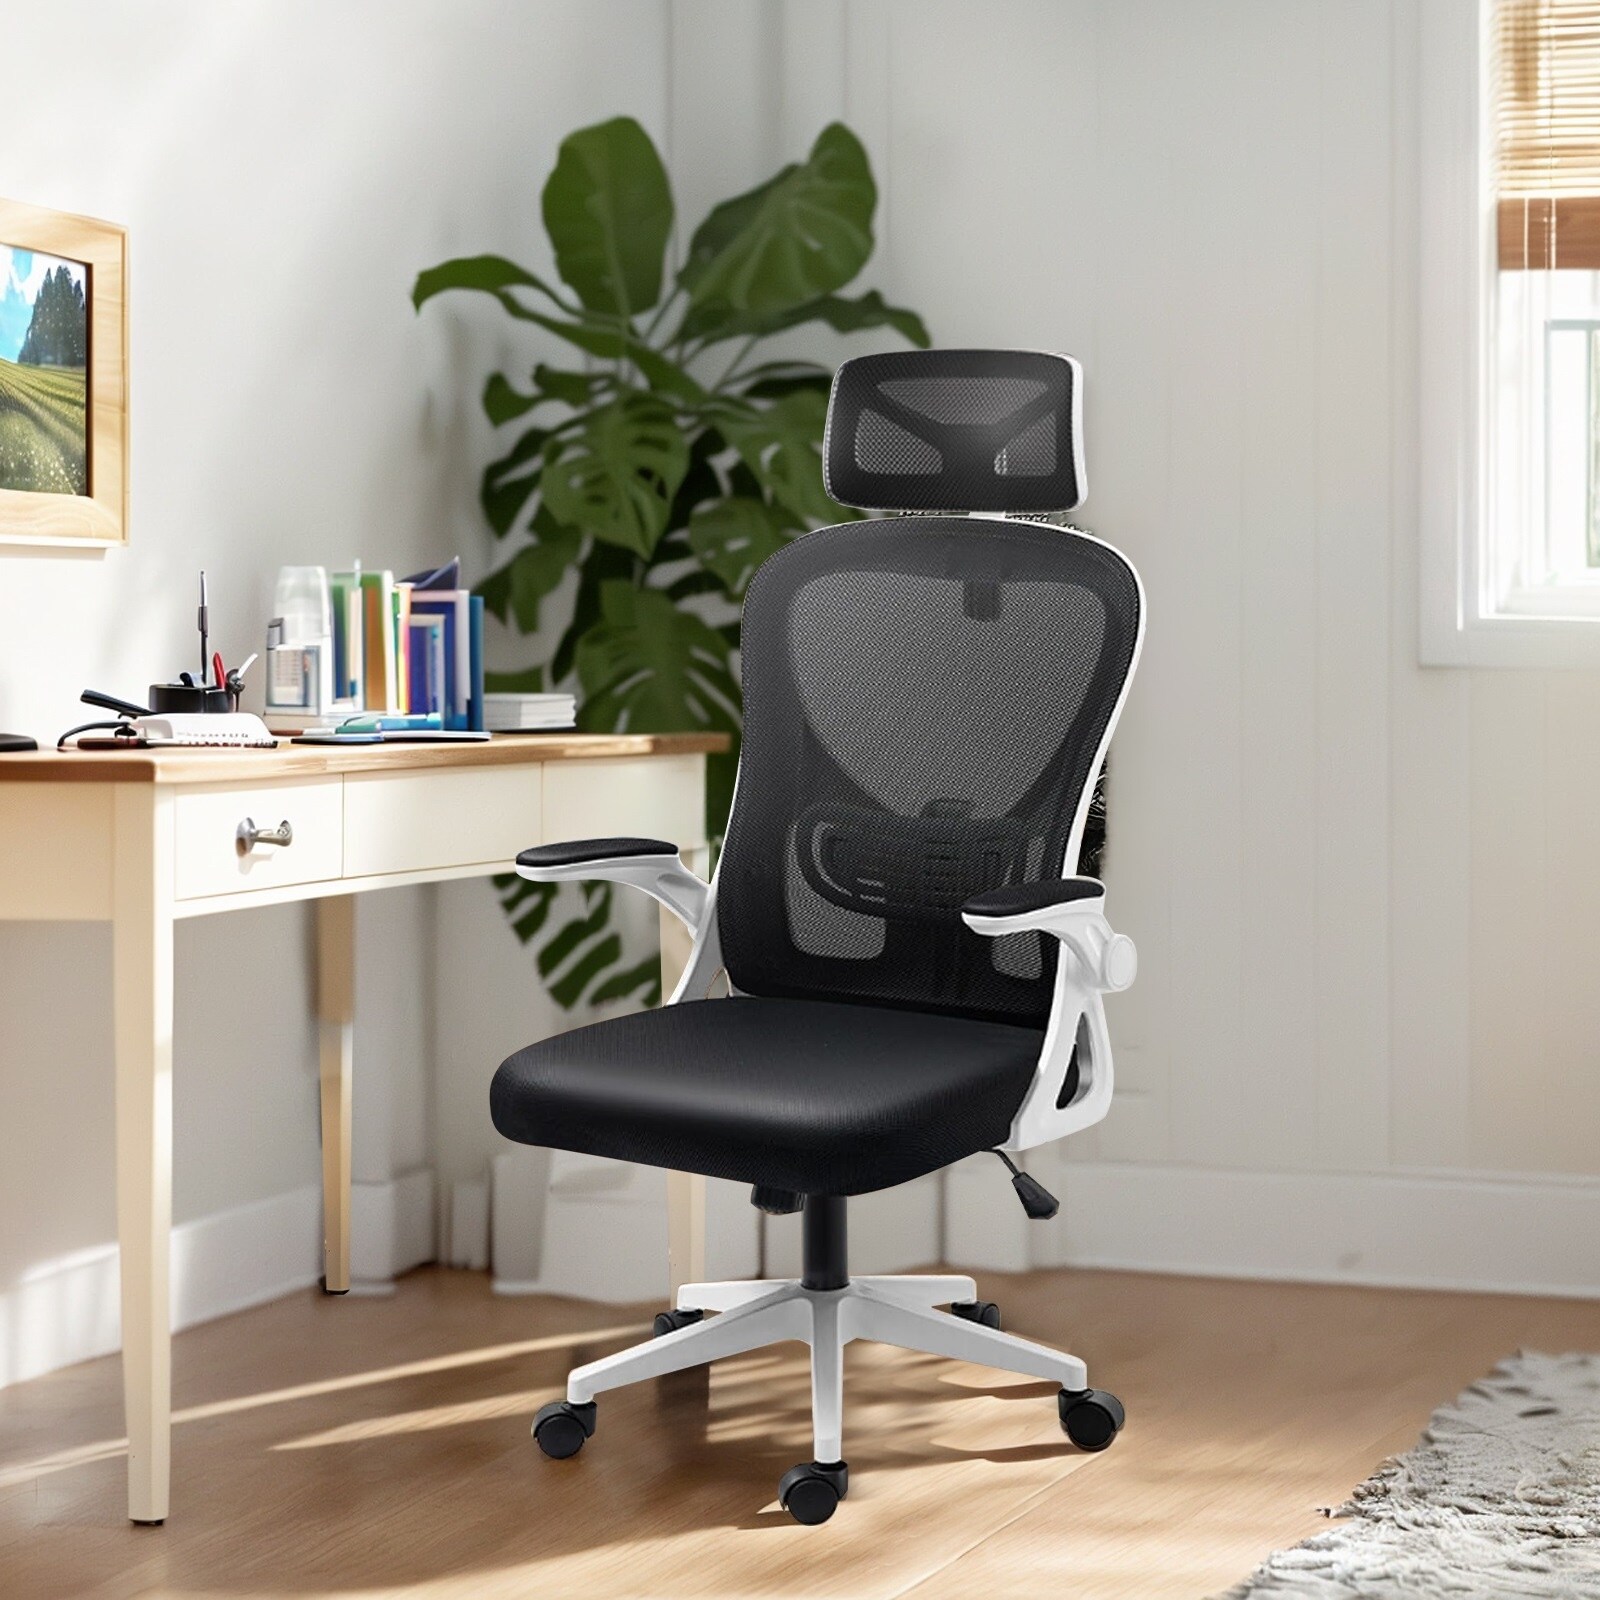 https://ak1.ostkcdn.com/images/products/is/images/direct/a965adabdf231da678bd4d361afaad09134c1af7/Office-Chair%2C-Ergonomic-Desk-Chair%2C-High-Back-Faux-Leather-Task-Chairs-for-Home-Office-for-Adult-Working-Study.jpg